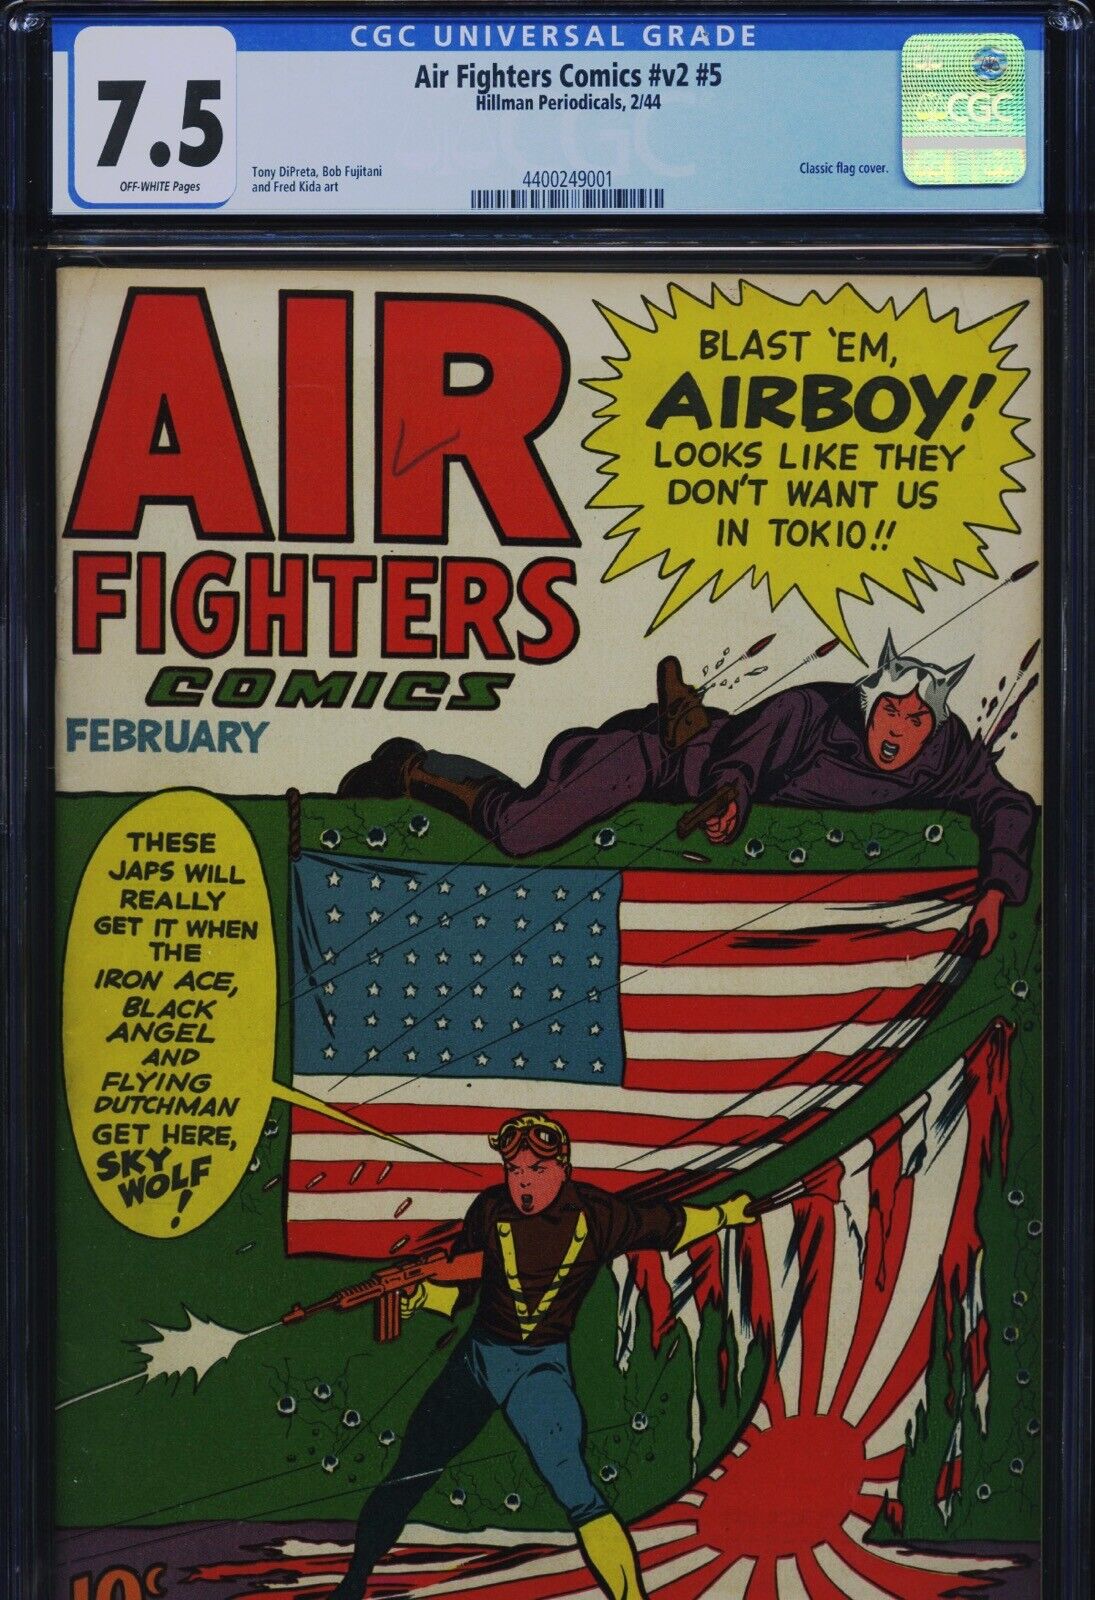 AIR FIGHTERS COMICS V2 #5 - 7.5, OW - Classic flag cover -  Golden Age